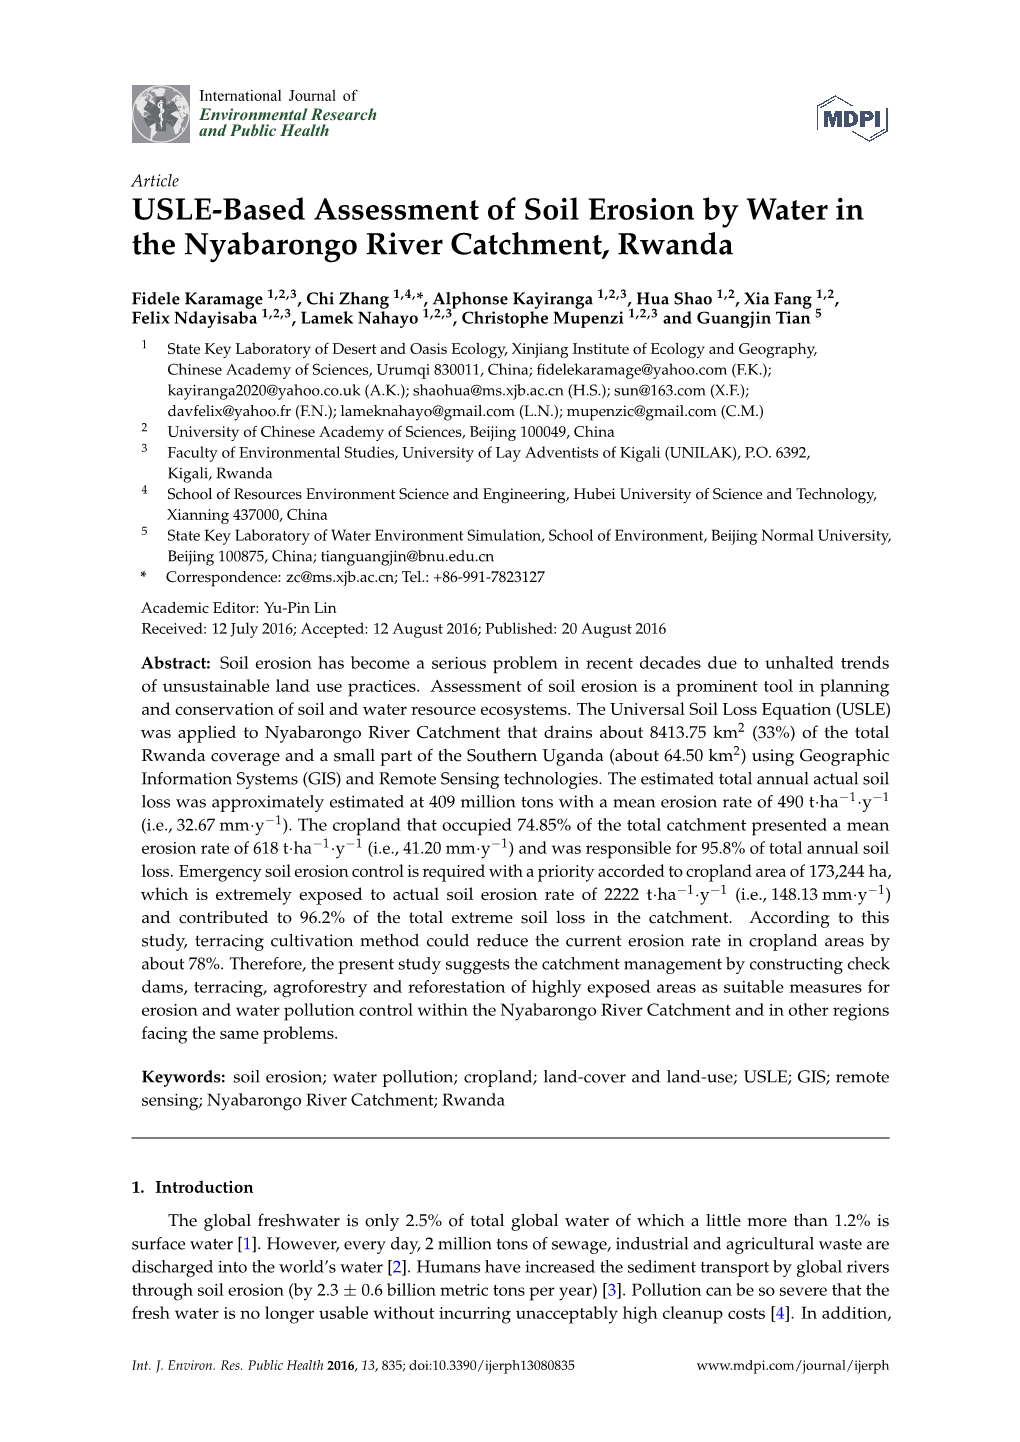 USLE-Based Assessment of Soil Erosion by Water in the Nyabarongo River Catchment, Rwanda